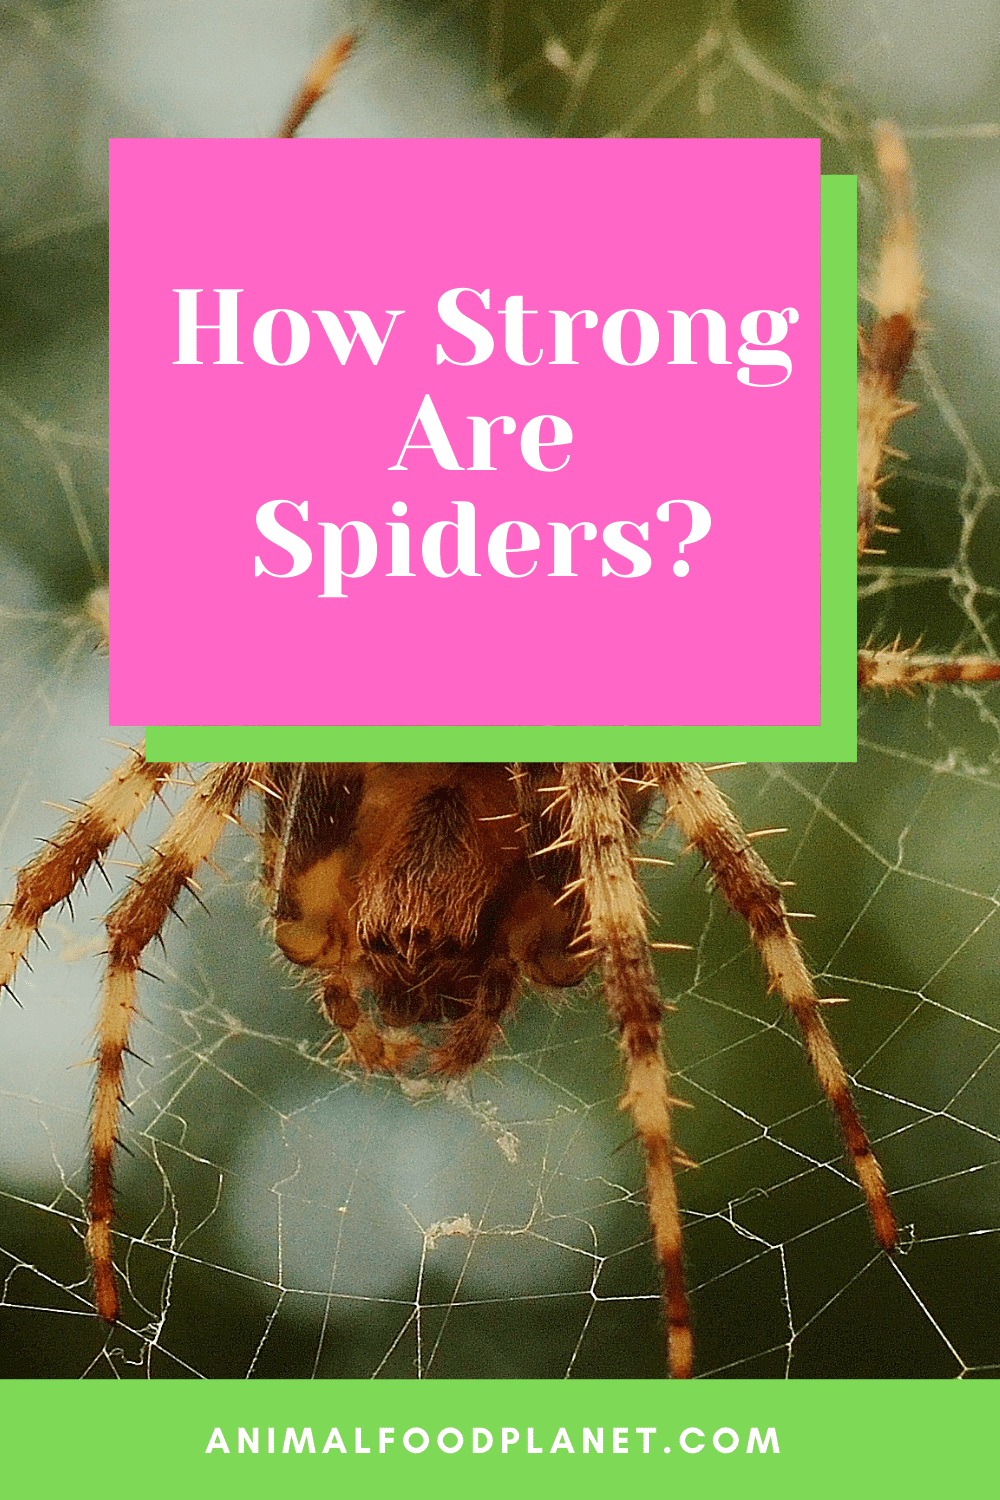 How Strong Are Spiders